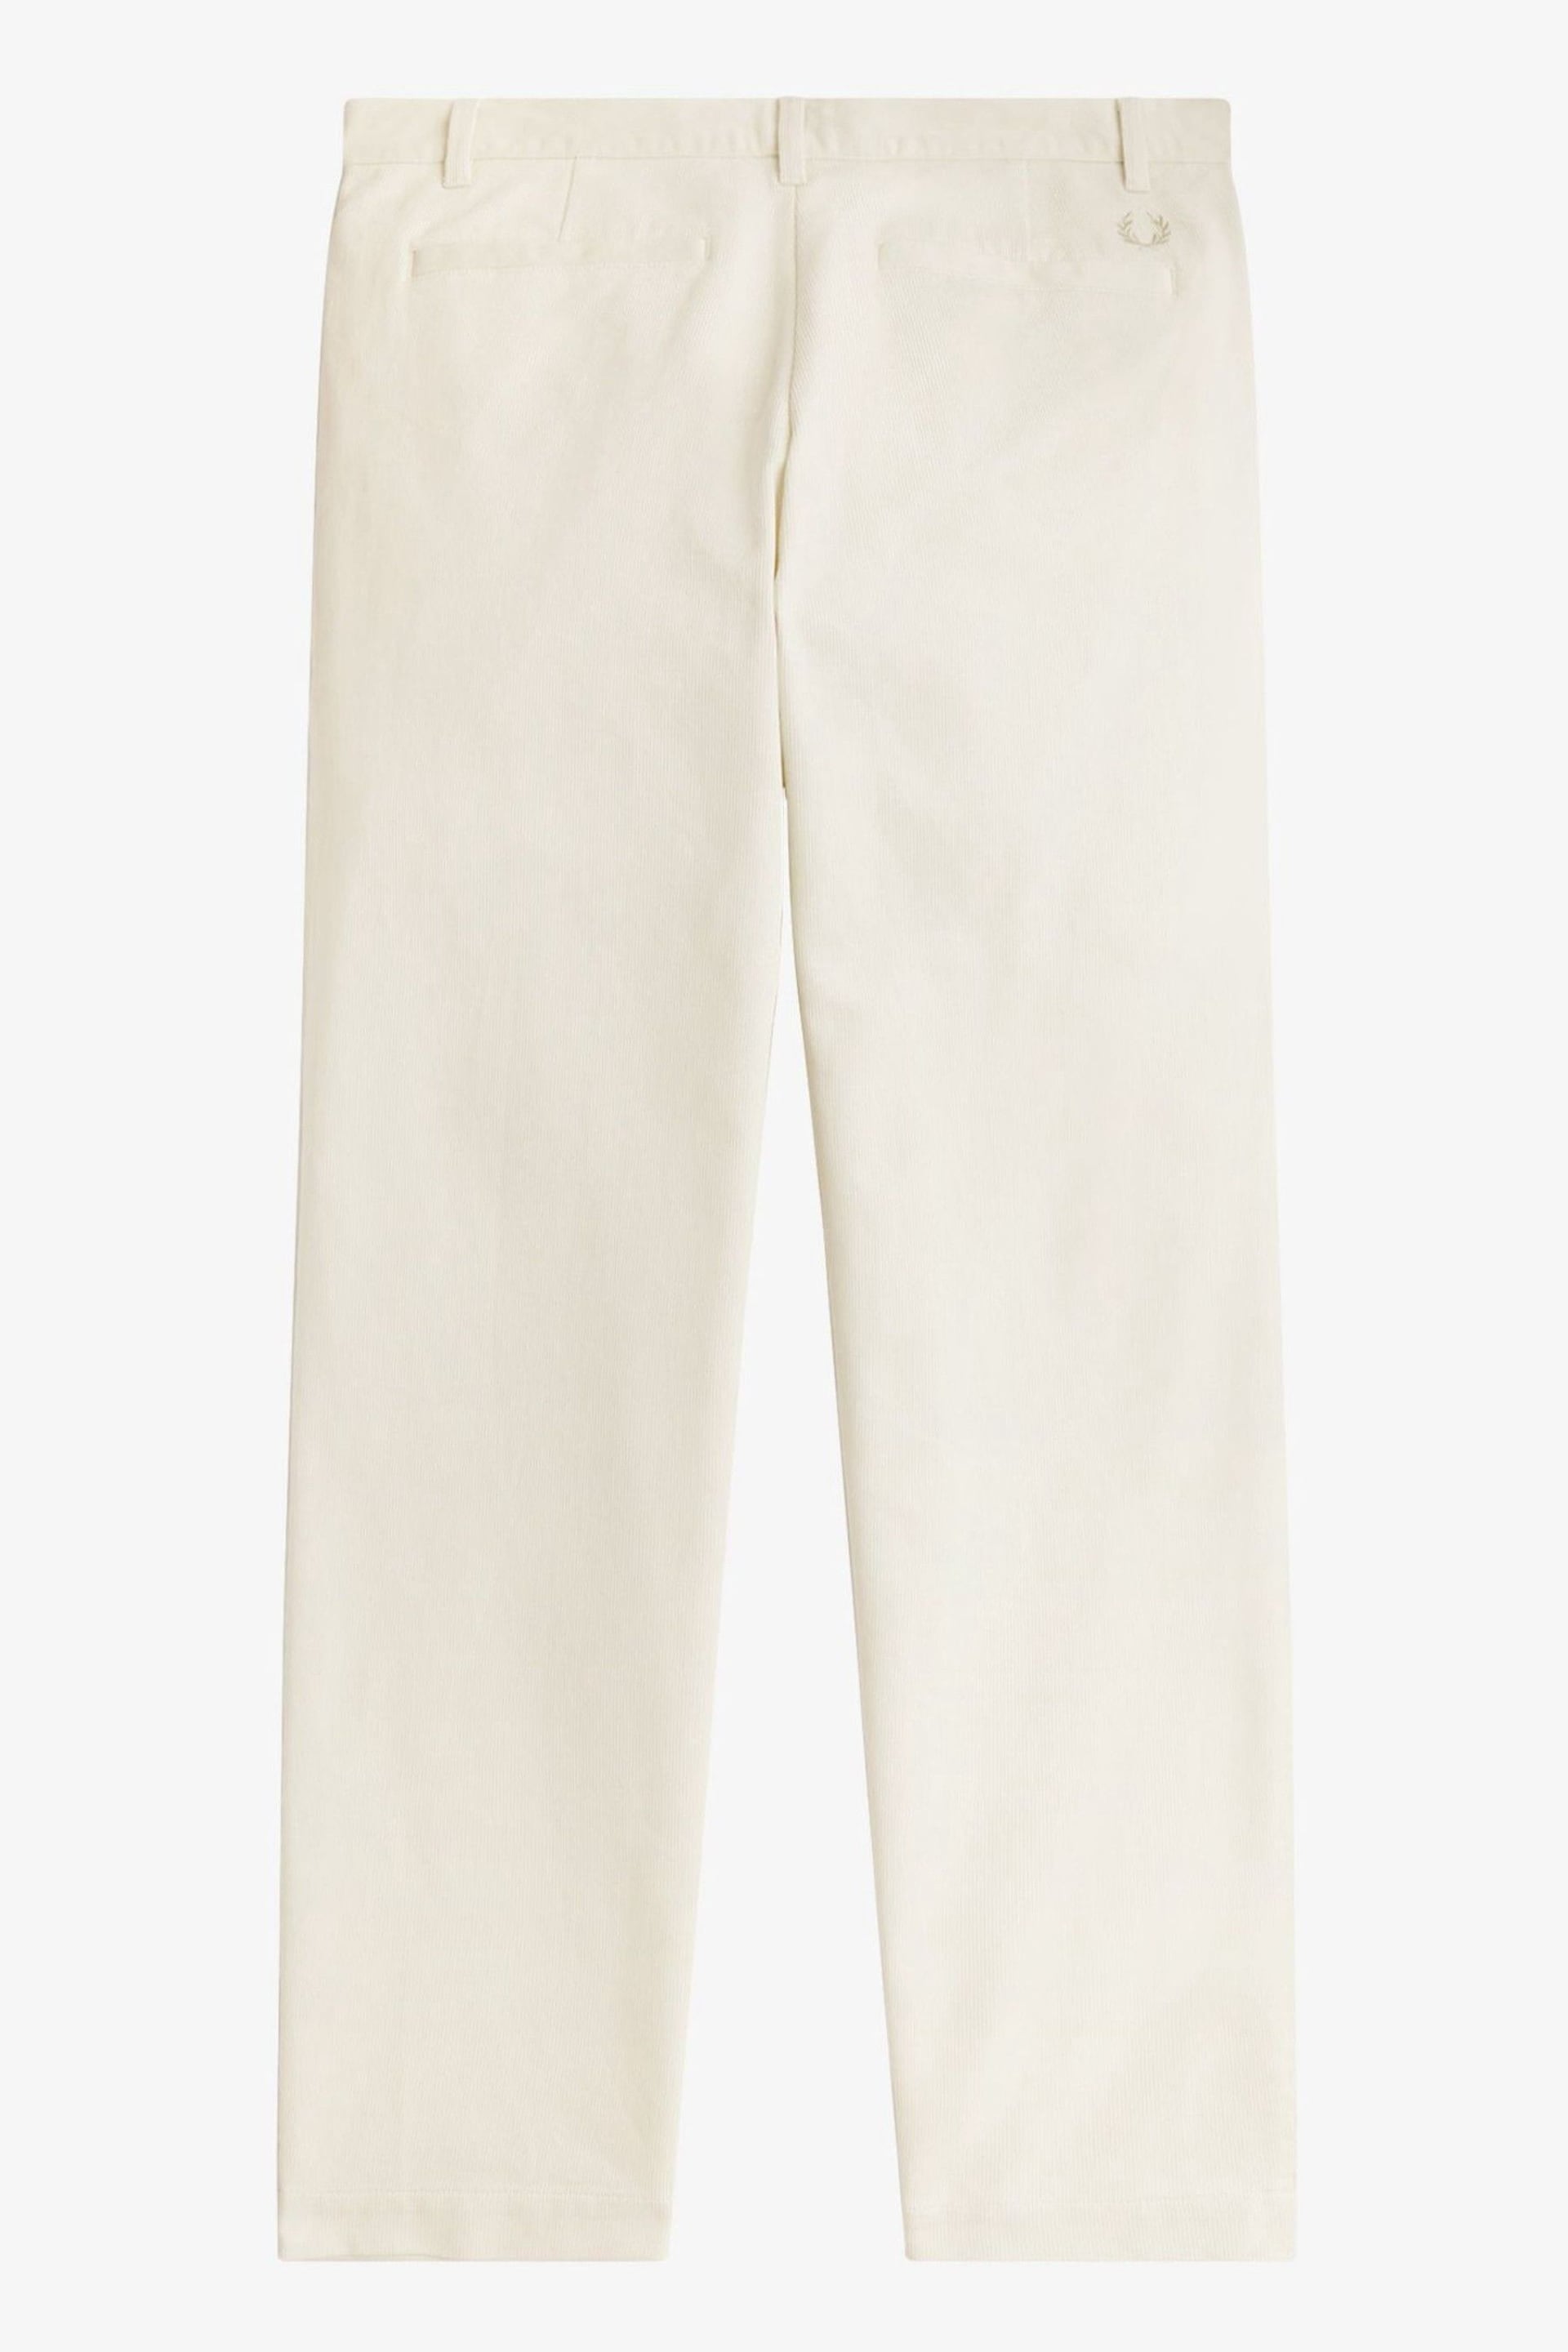 Fred Perry Straight Fit Bedford Cord Ecru White Trousers - Image 7 of 7